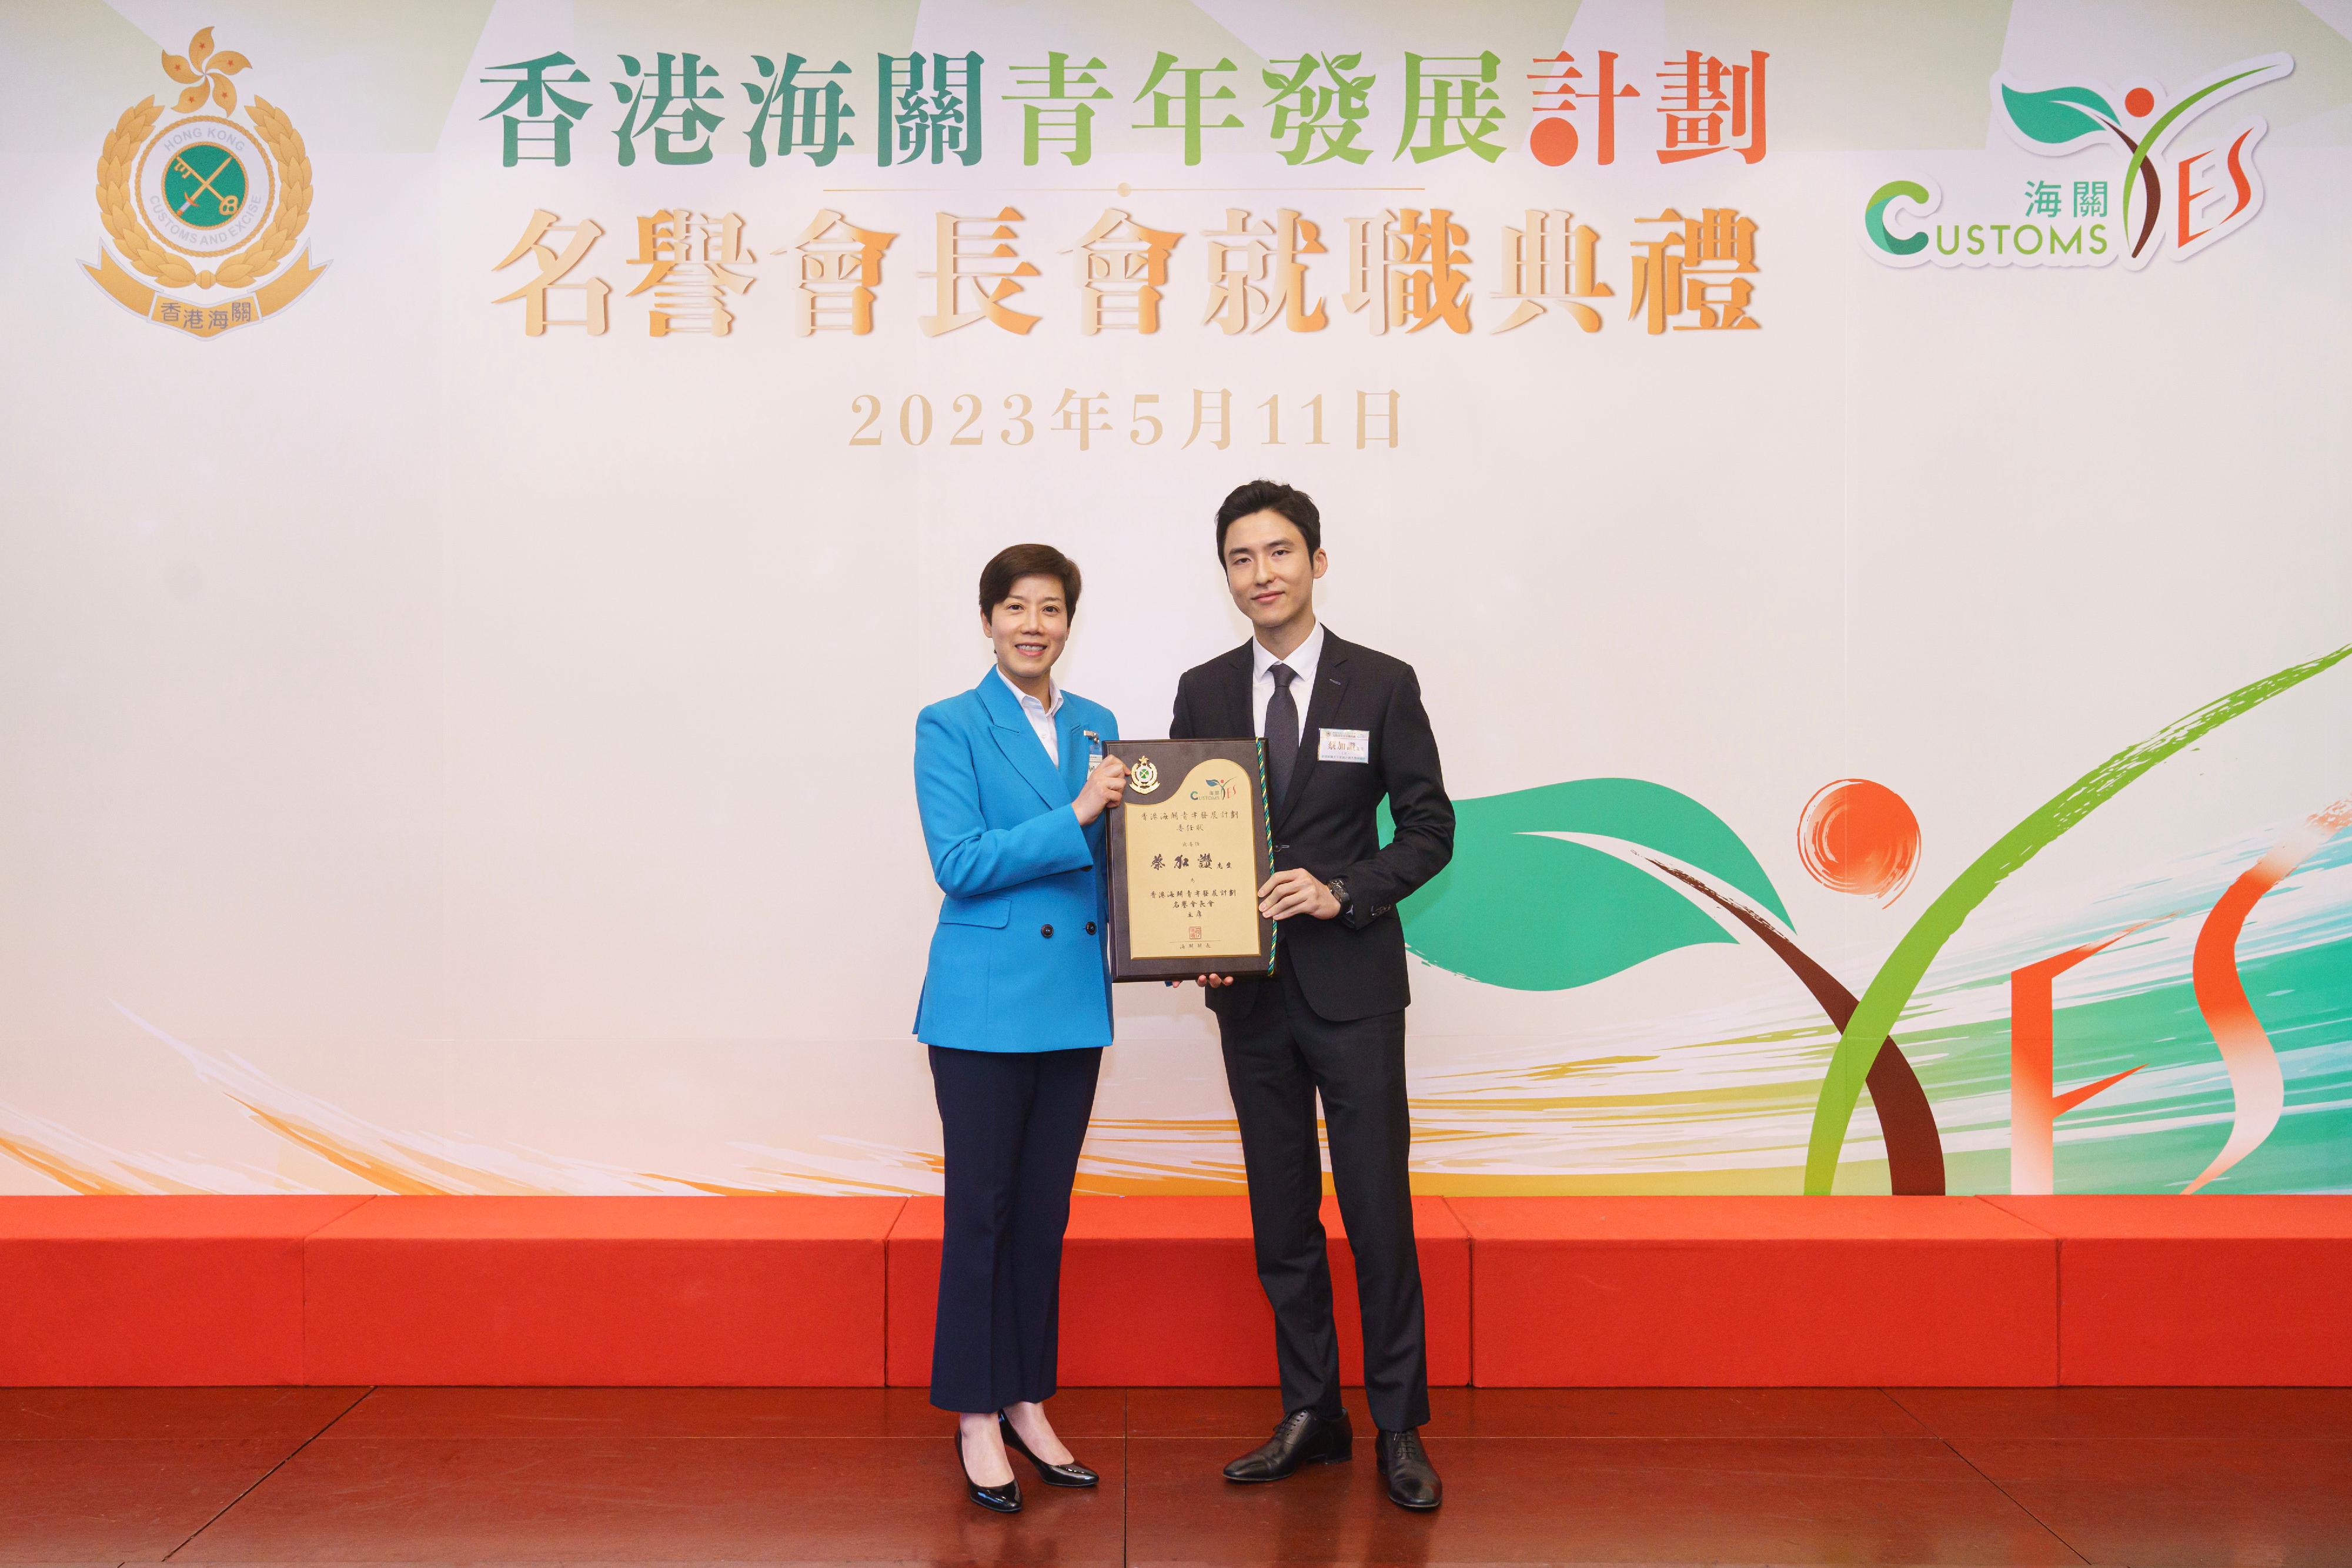 Hong Kong Customs today (May 11) held the inaugural ceremony of the "Customs YES" Honorary Presidents' Association at the Customs Headquarters Building. Photo shows the Commissioner of Customs and Excise, Ms Louise Ho (left), presenting an appointment certificate to the Chairperson, Mr Karson Choi (right).